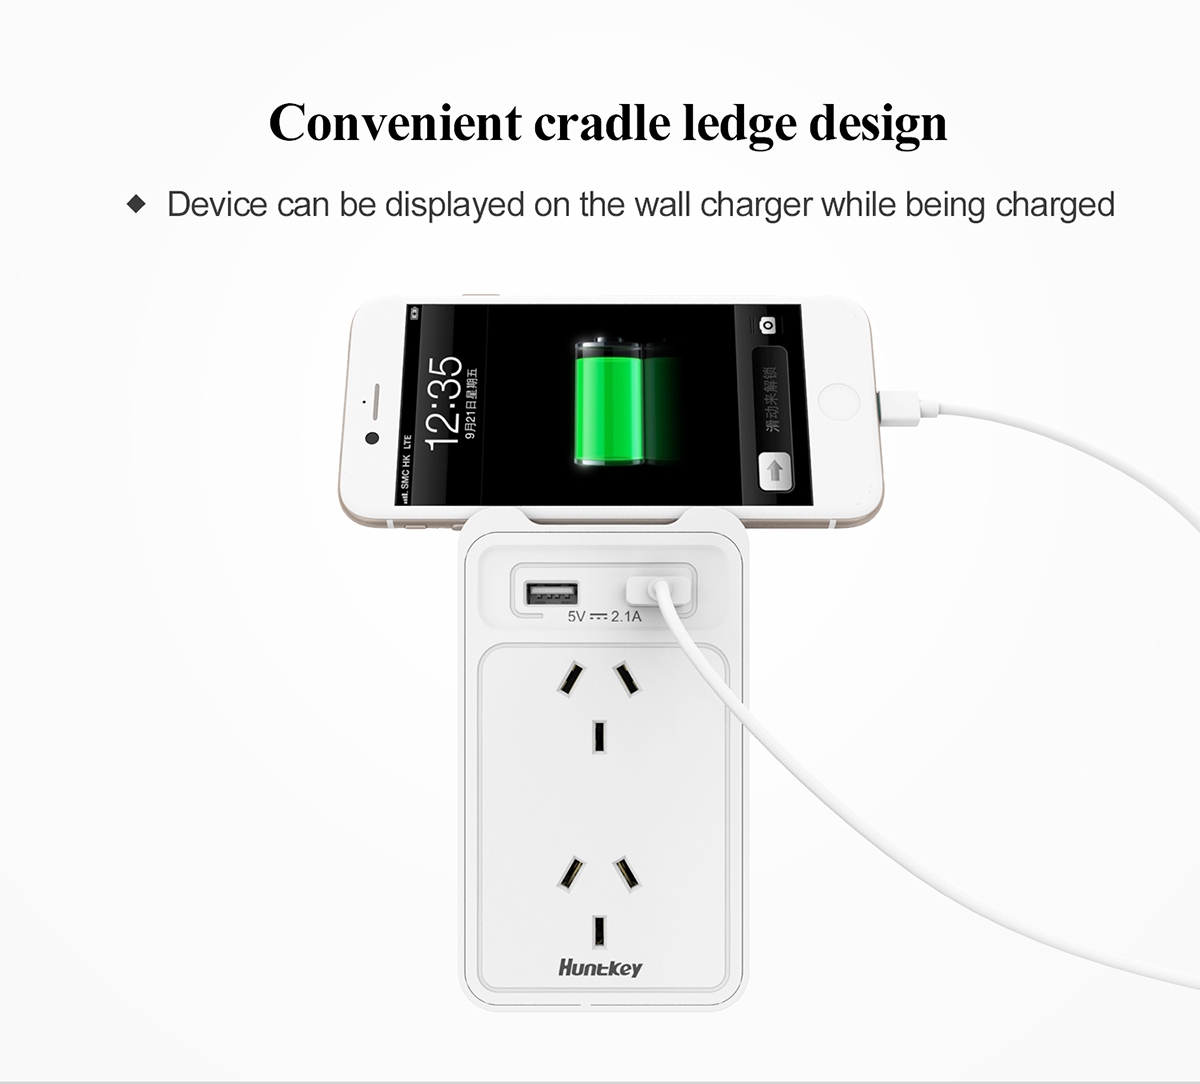 HUNTKEY SAC207 SMART WALL CHARGER with 2 AC and 2 USB combined 2.4A (TWIN PACK) 4